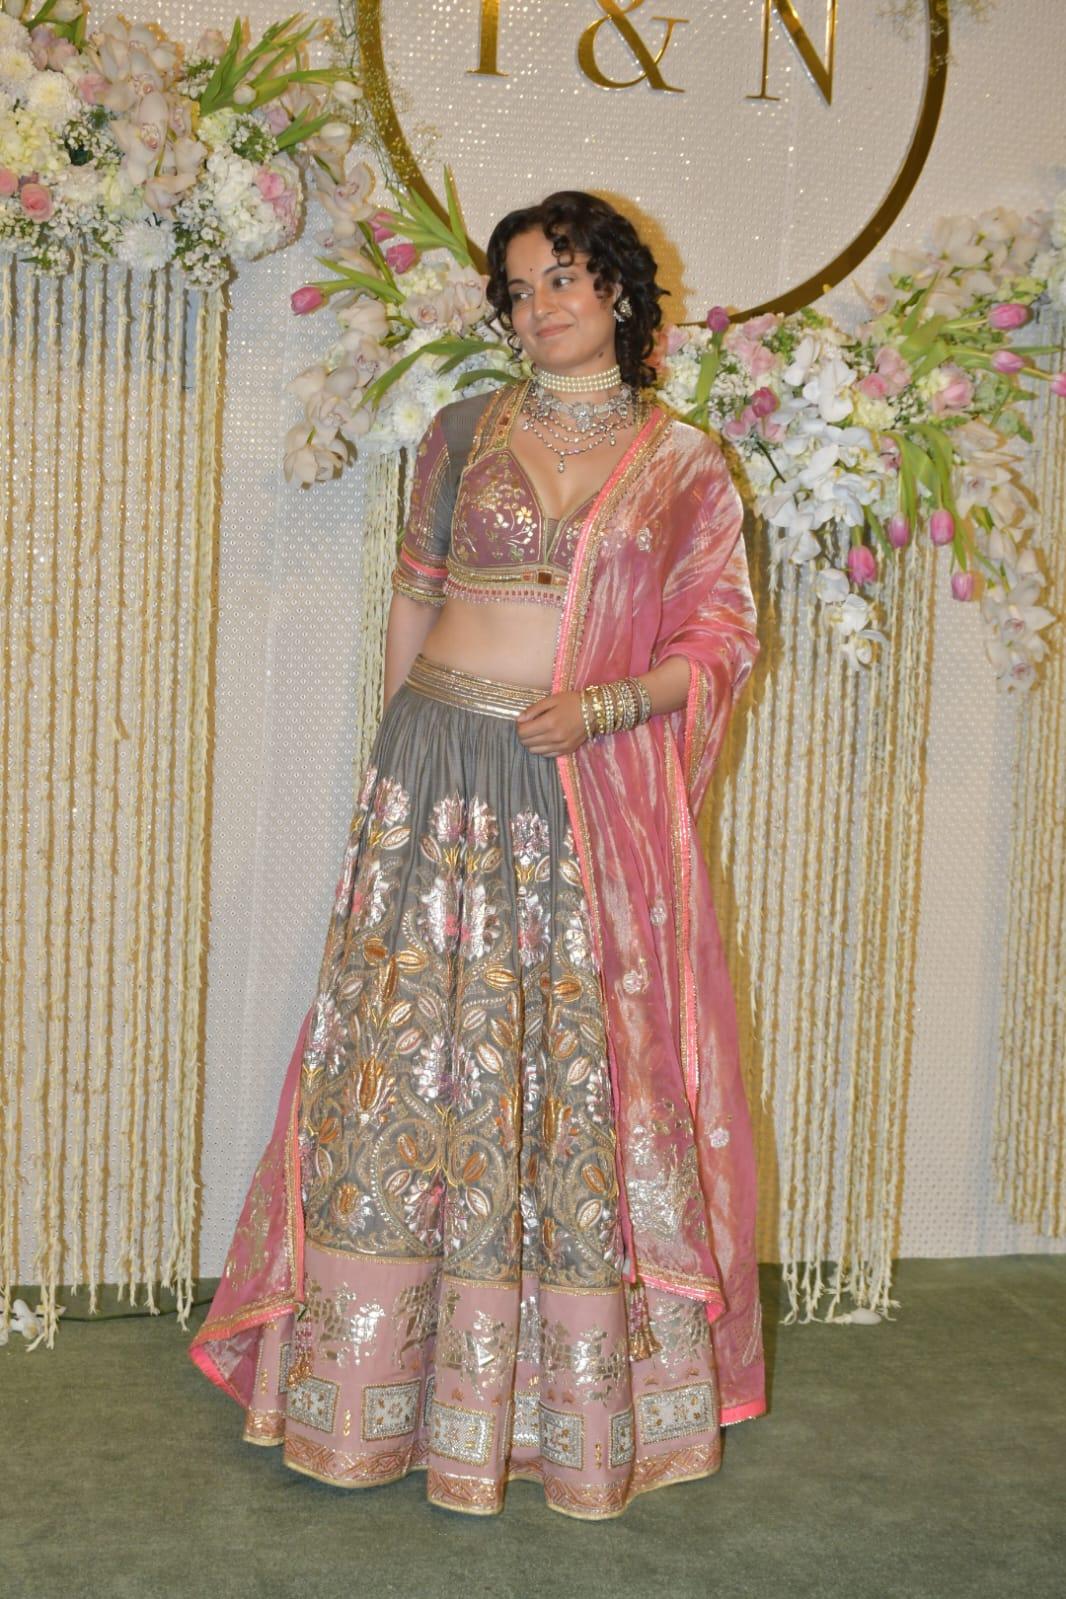 Kangana Ranaut's choice of traditional outfits is simply breathtaking! The actress looked gorgeous in a heavily embroidered grey lehenga set